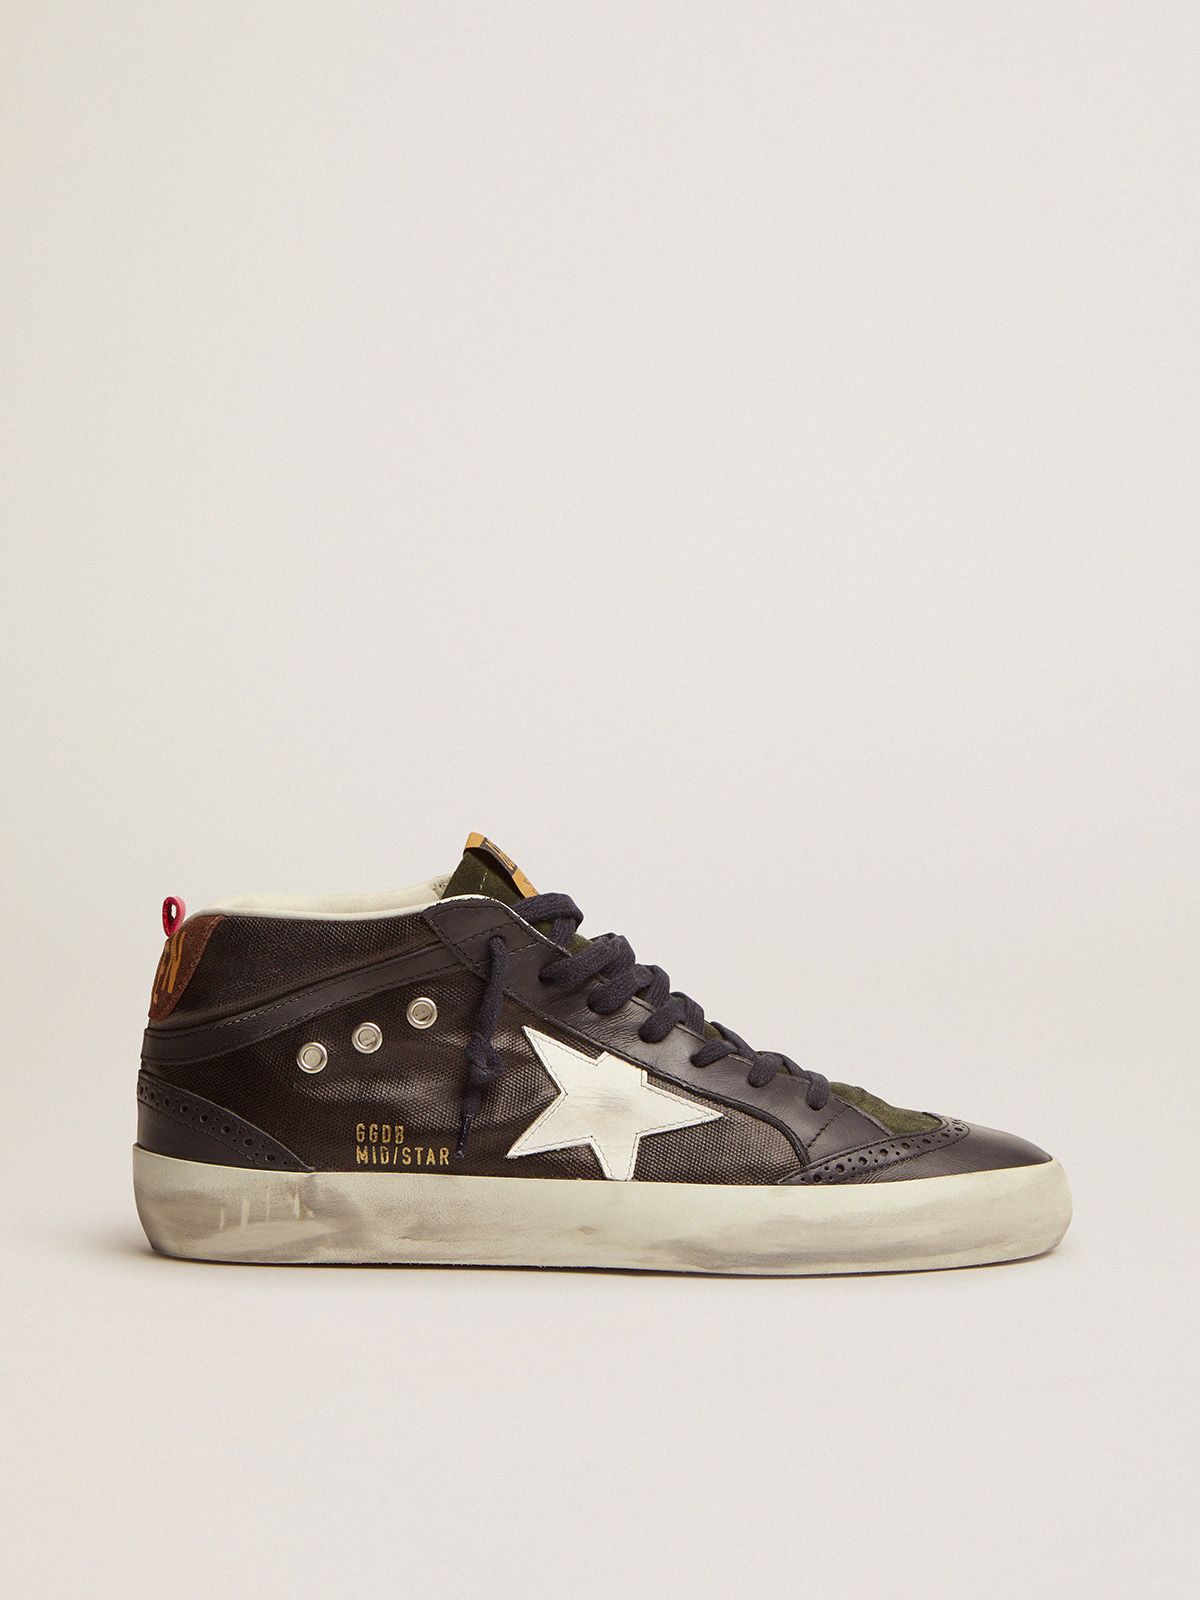 Mid Star sneakers in dark blue canvas with white leather star | 